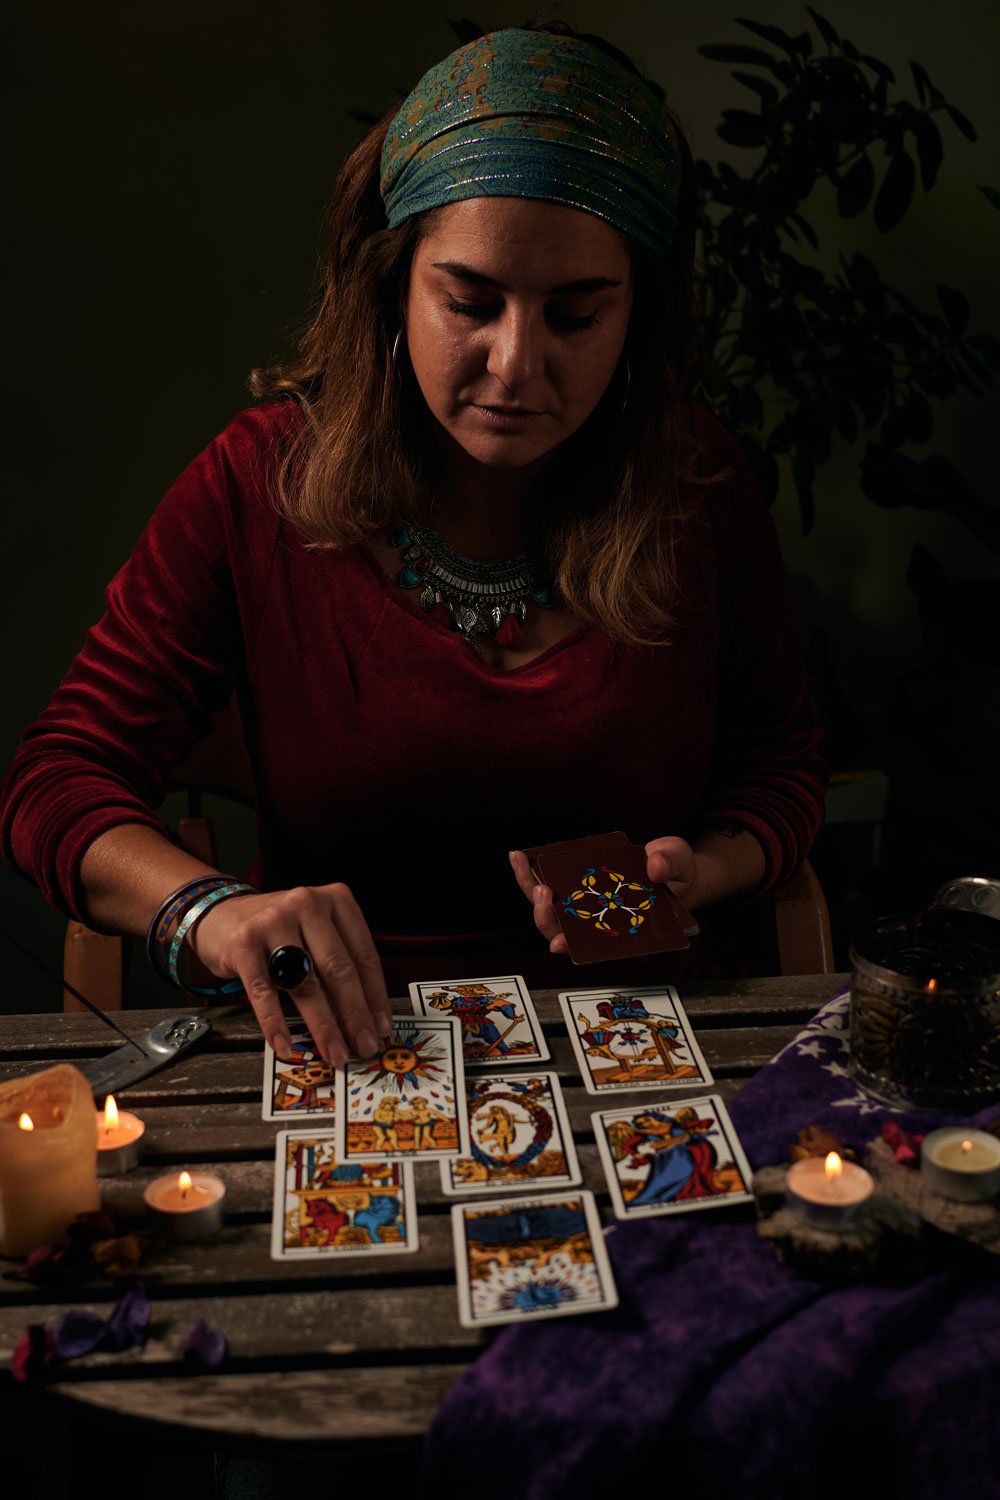 pythoness-reads-tarot-cards-on-a-table-with-candle-2022-03-29-23-44-16-utc.jpg